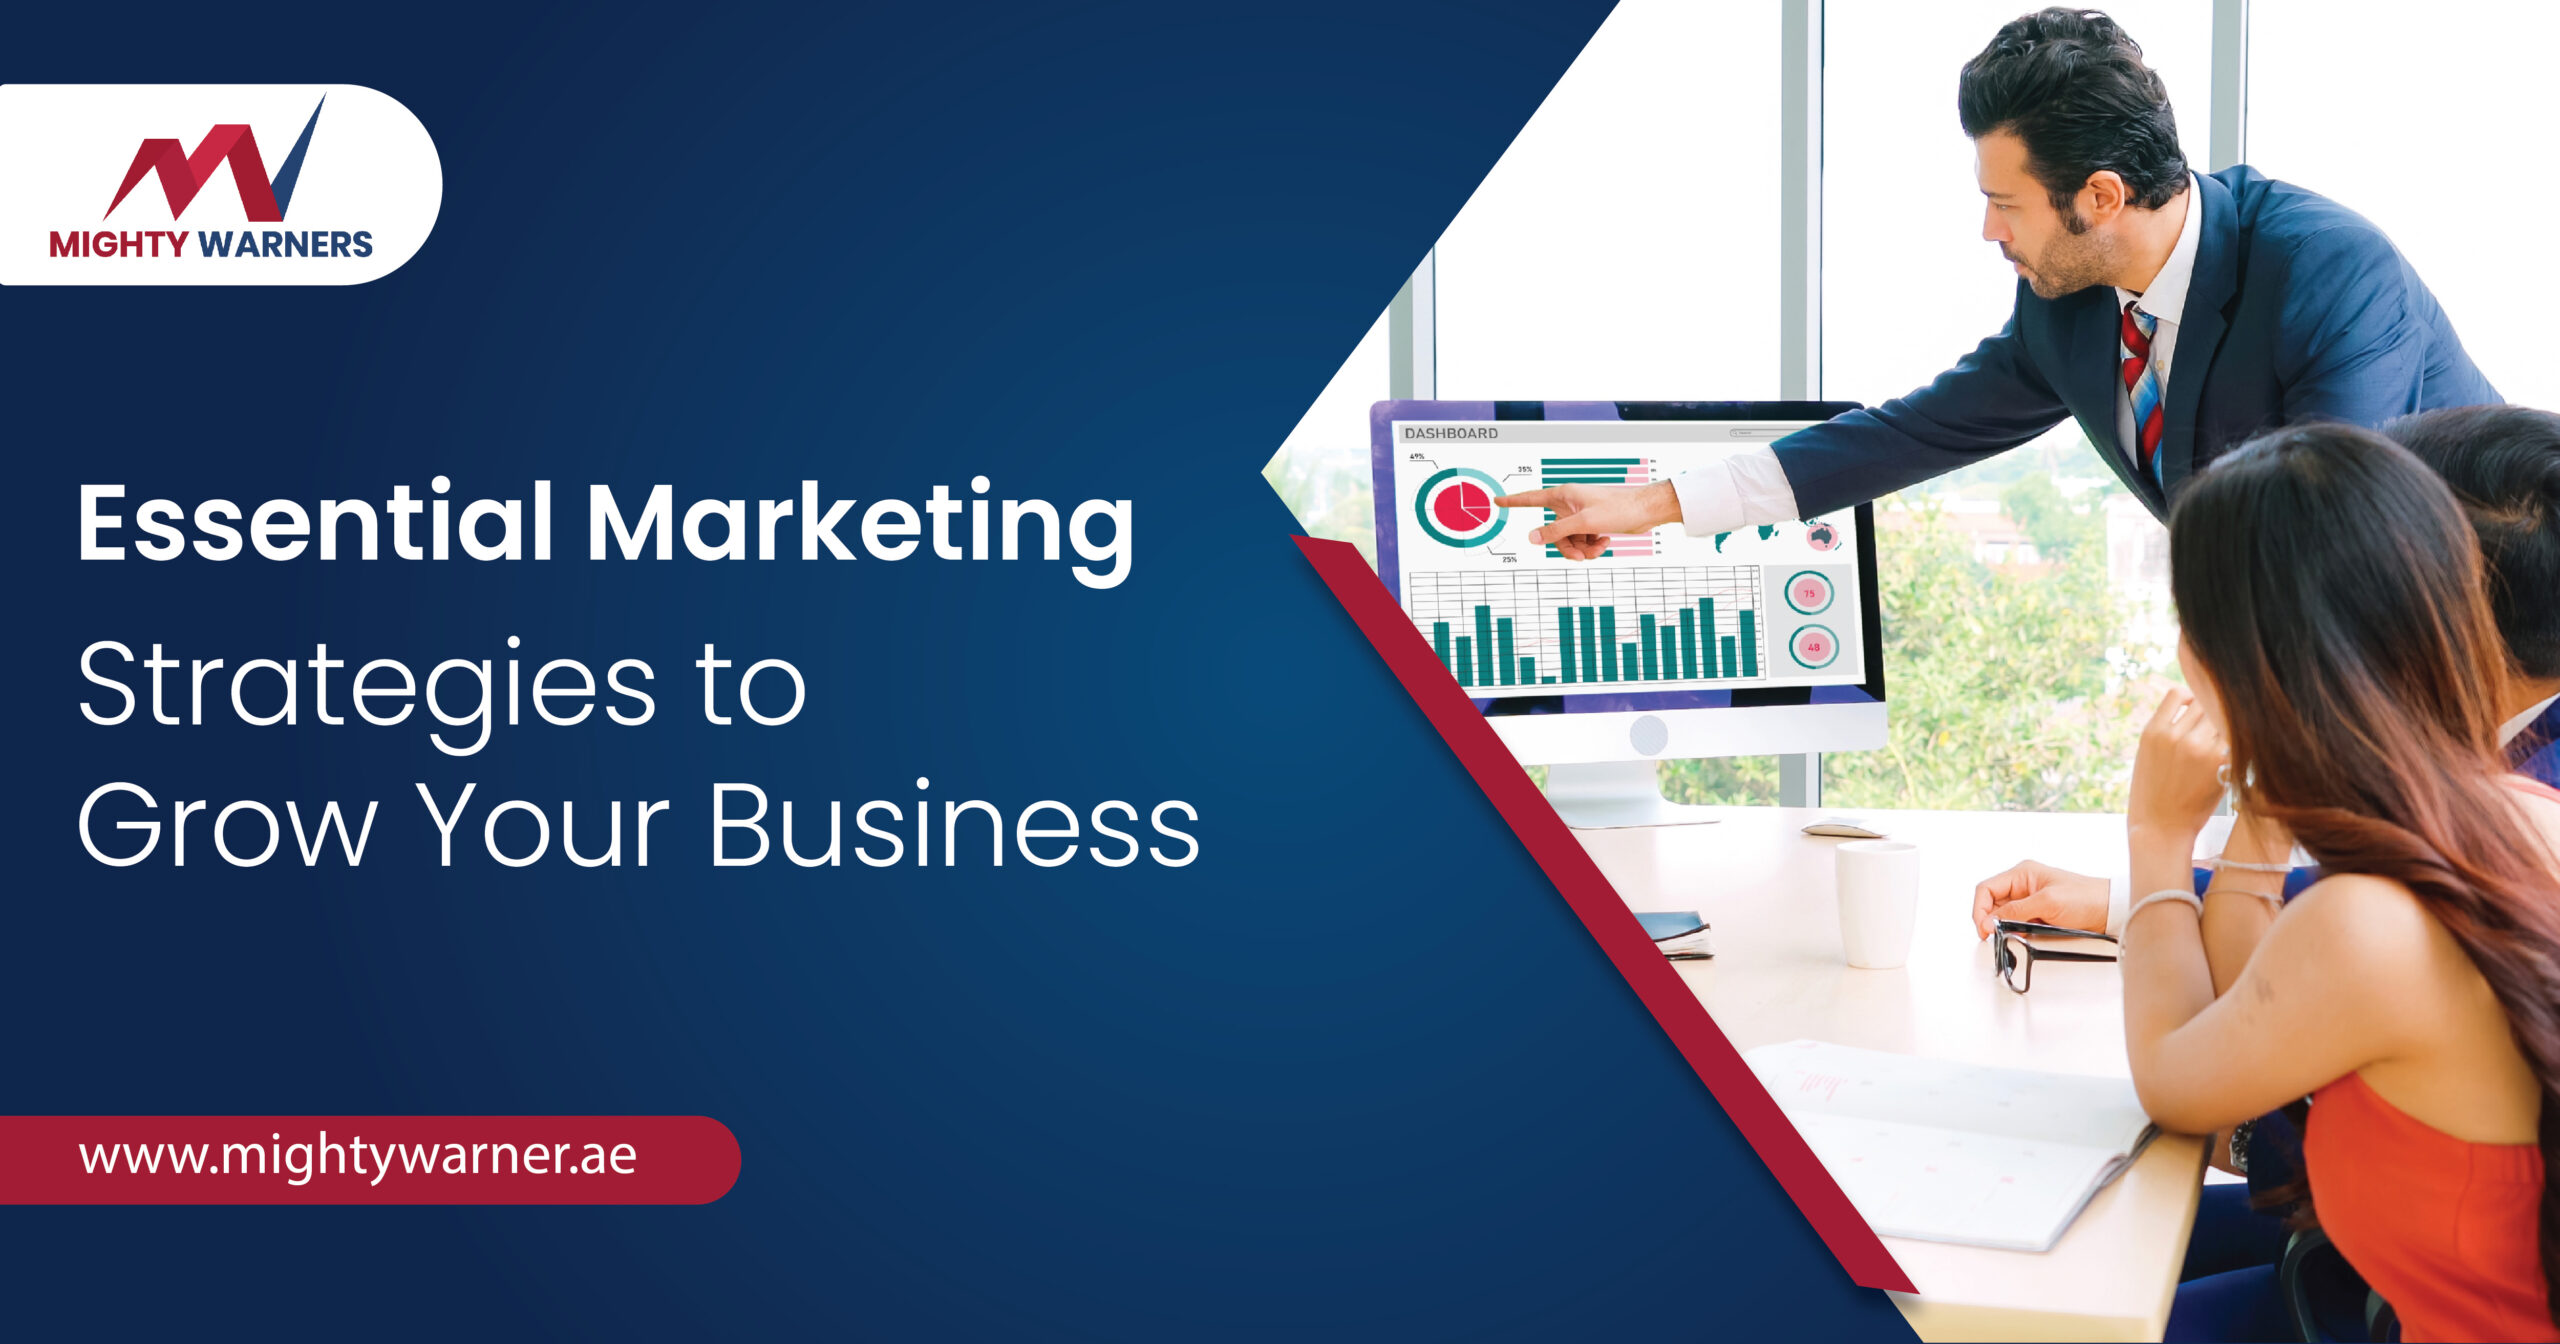 Essential Marketing Strategies to Grow Your Business